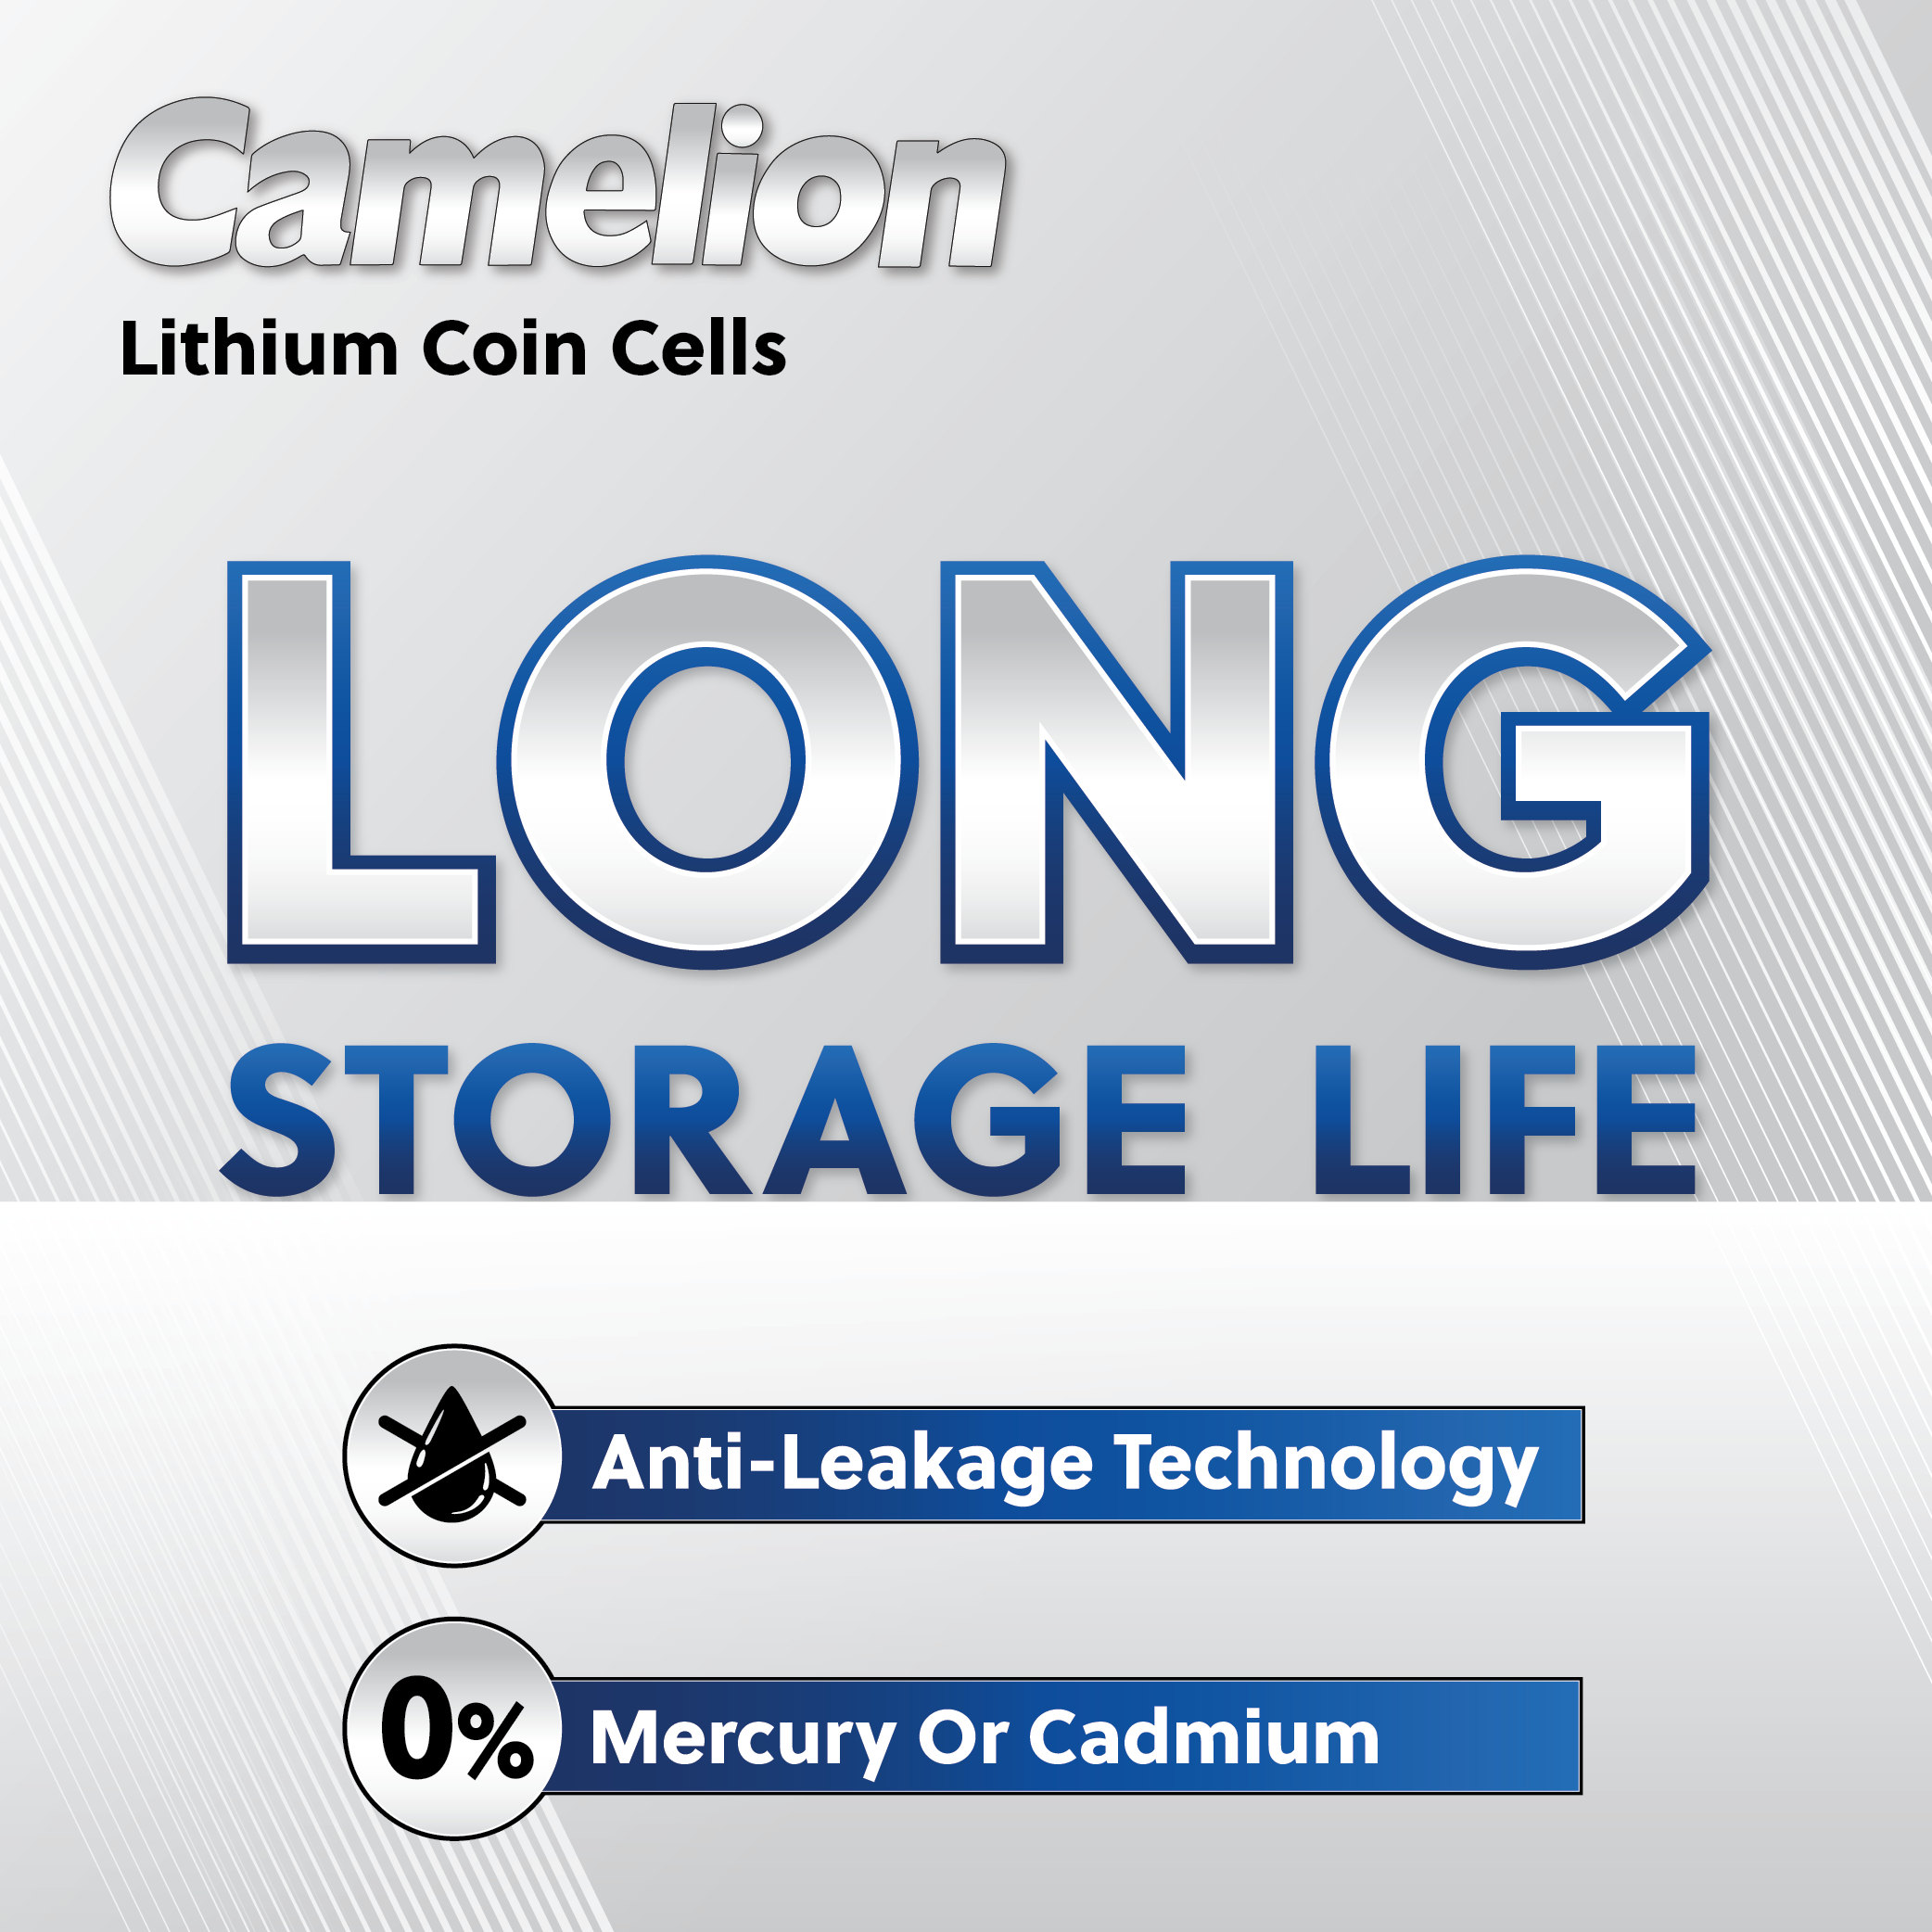 Camelion CR2016 3V Lithium Coin Cell Battery